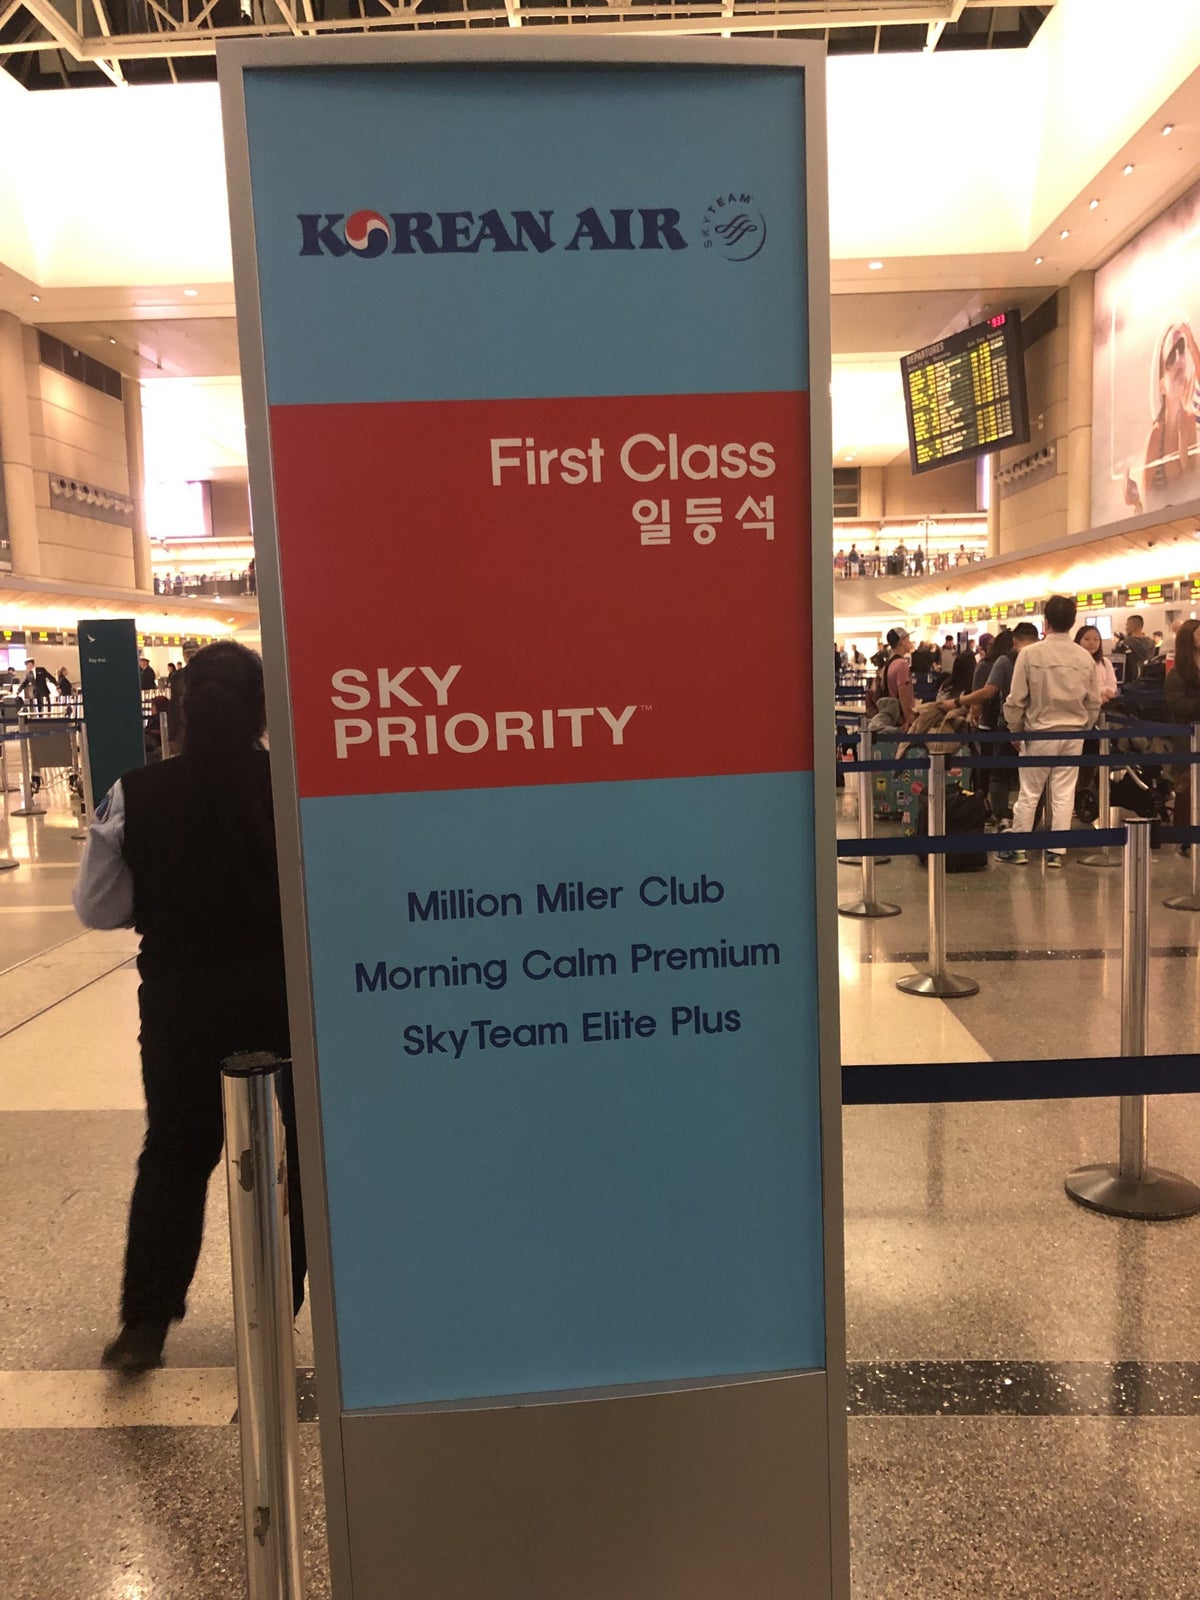 Korean Air first class check-in signage